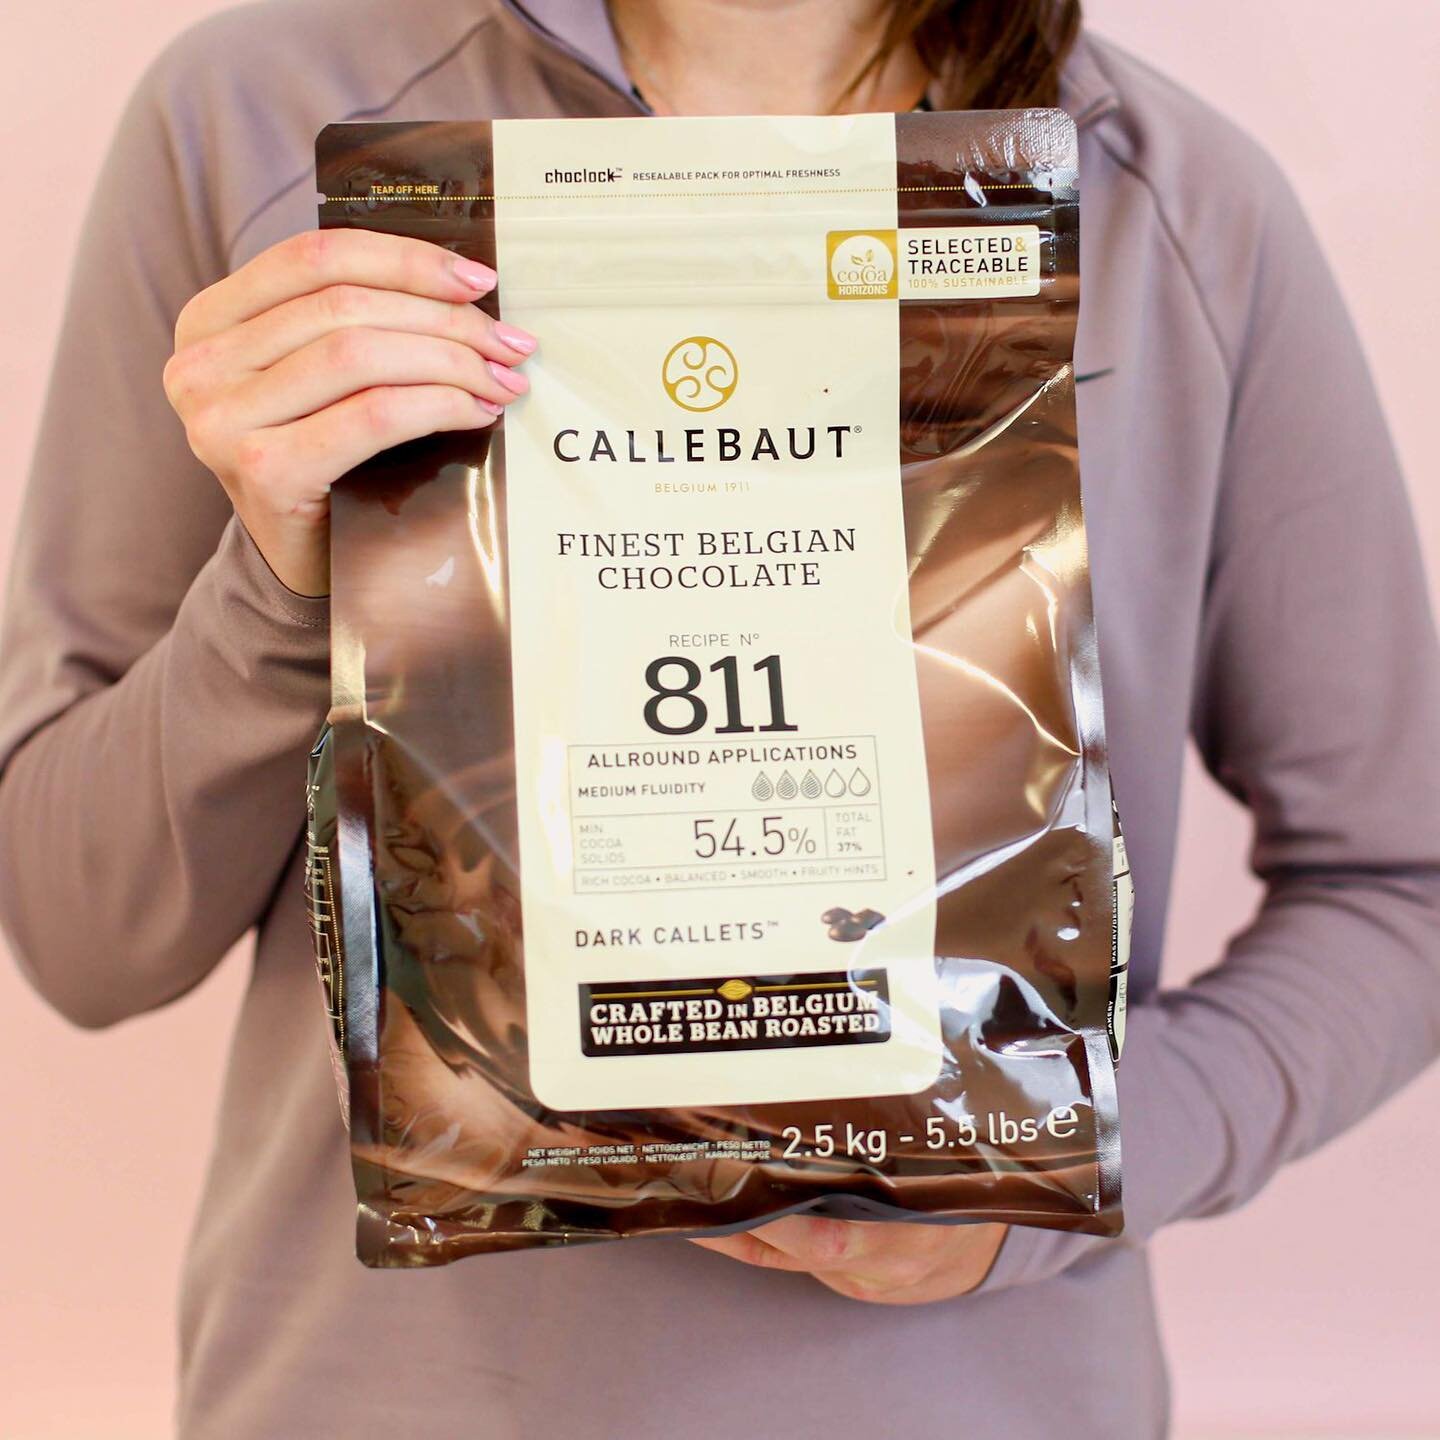 H A P P Y &bull;  S U N D A Y 🔔 I&rsquo;ve added even more Callebaut special offers to the Chocolate &amp; Cocoa page!

Callebaut Chocolate, Cocoa, Praline and more 🛍️

All you need to stock up on your baking supplies and ingredients 🤎 

enjoy, lo